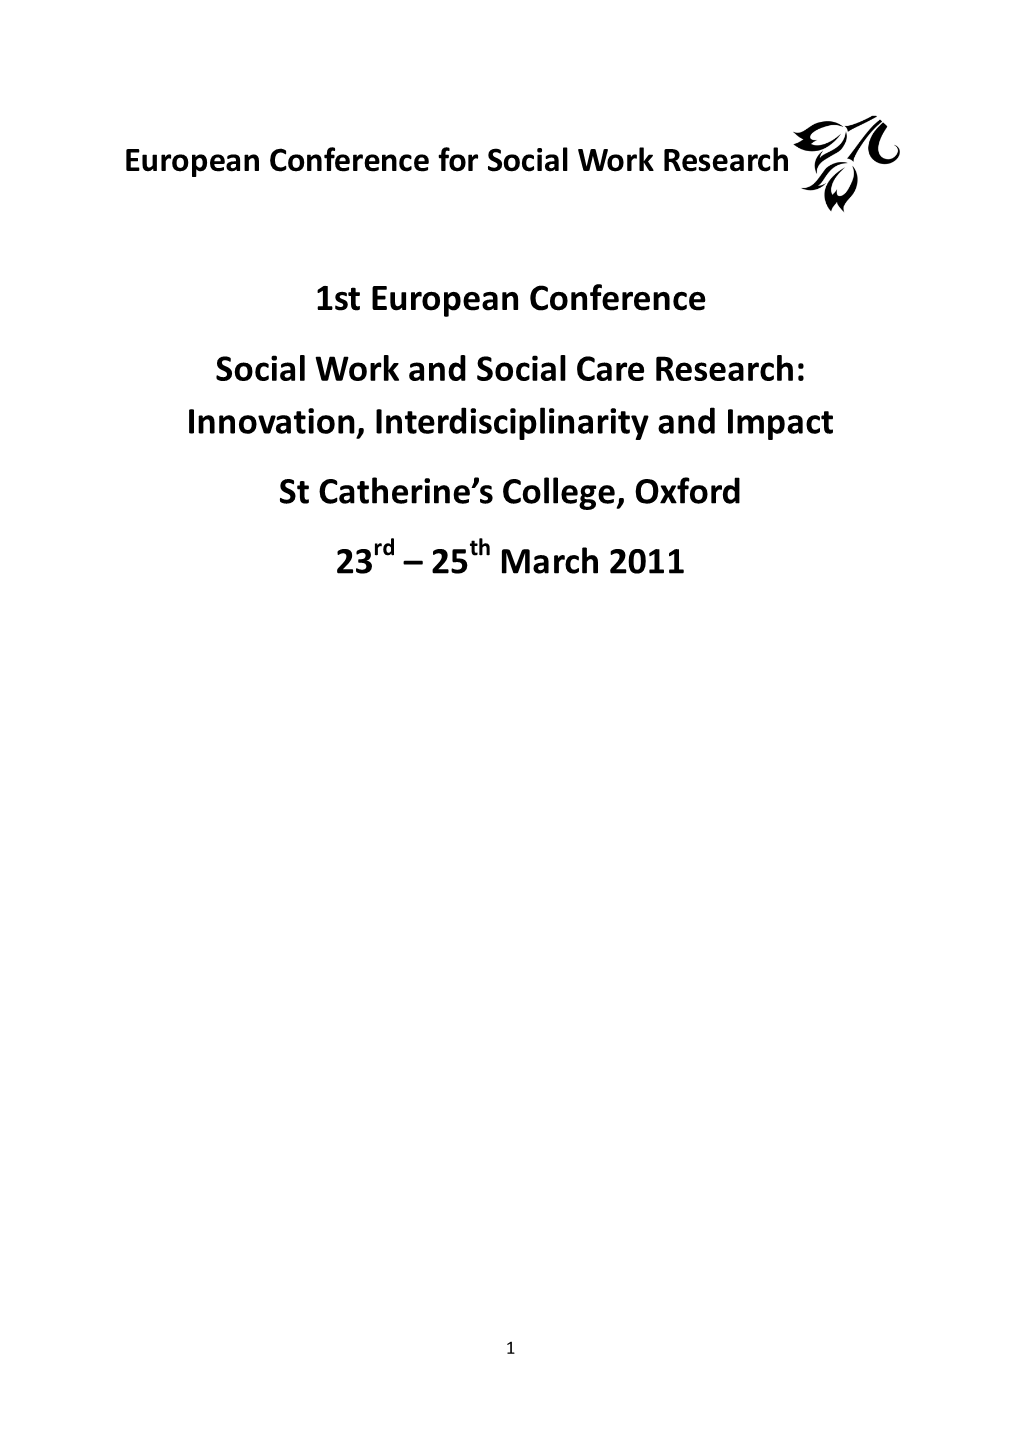 1St European Conference Social Work and Social Care Research: Innovation, Interdisciplinarity and Impact St Catherine’S College, Oxford 23Rd – 25Th March 2011